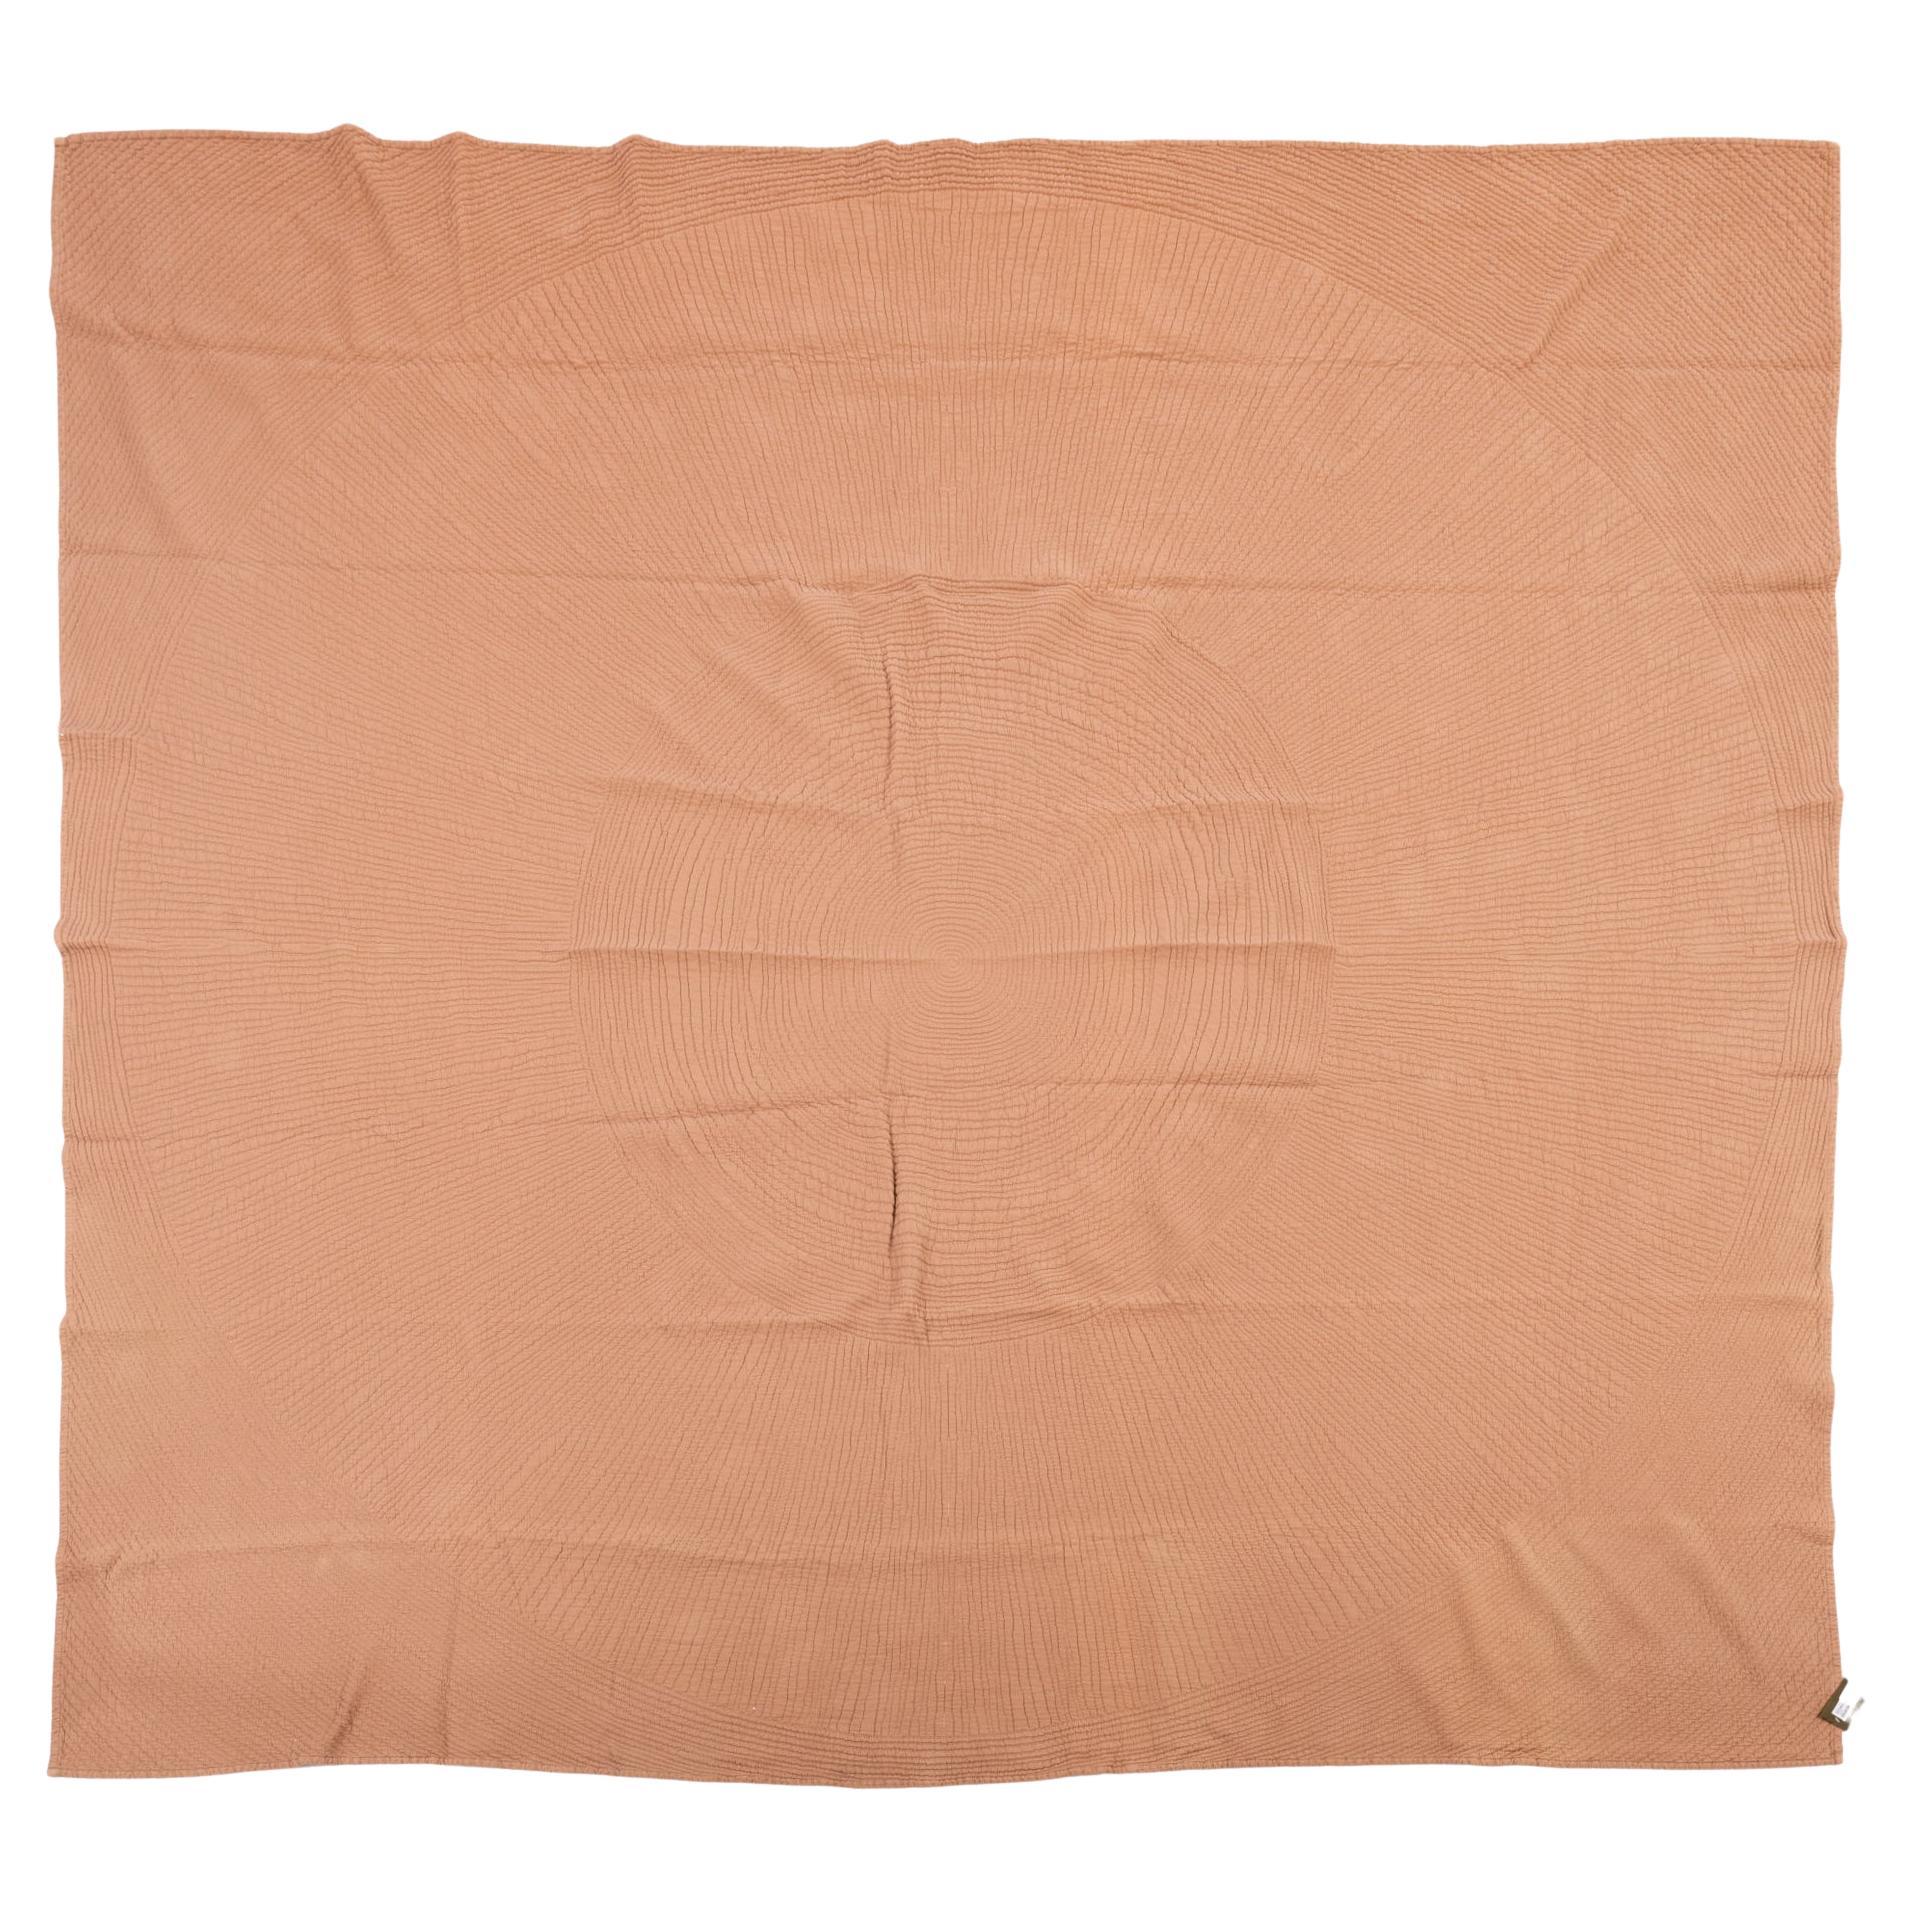 B/2059 -  Quilted cotton for this bedspread in hazelnut color.
Tactile materiality, softness and craftsmanship give the home the sense and pleasure of what is handmade.
By Vivaraise: was in France.